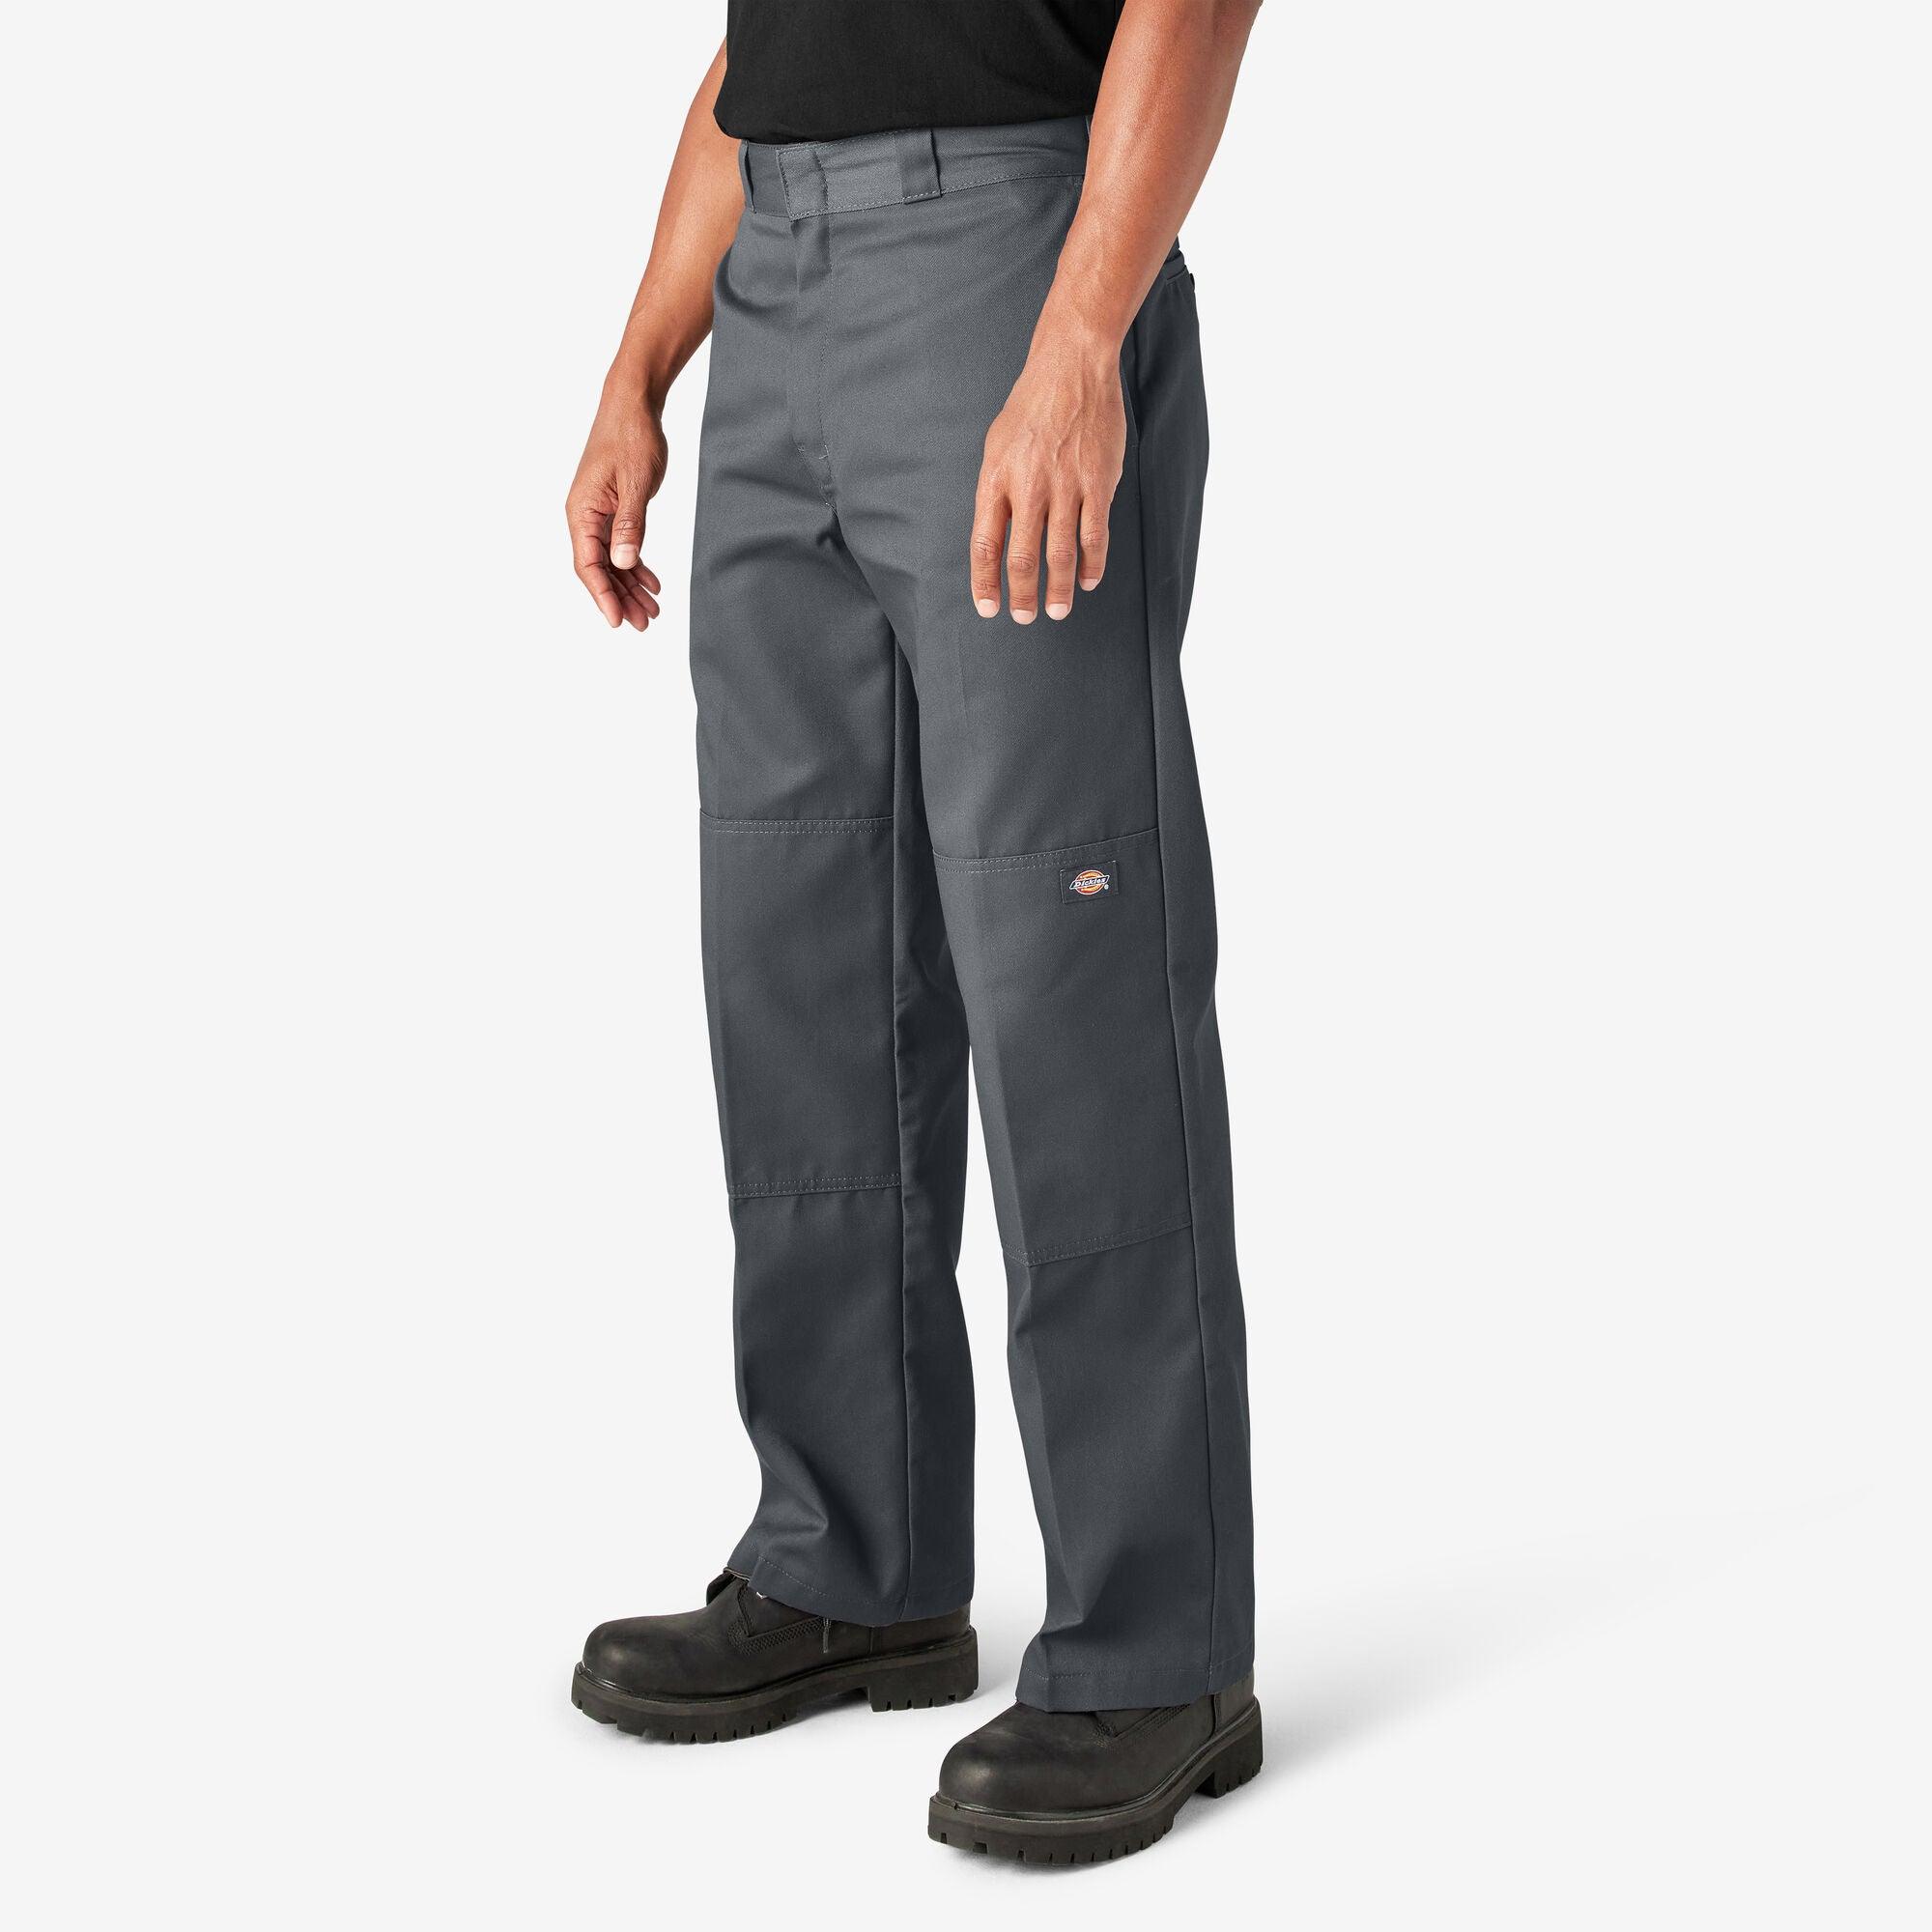 Loose Fit Double Knee Work Pants, Charcoal Gray - Purpose-Built / Home of the Trades